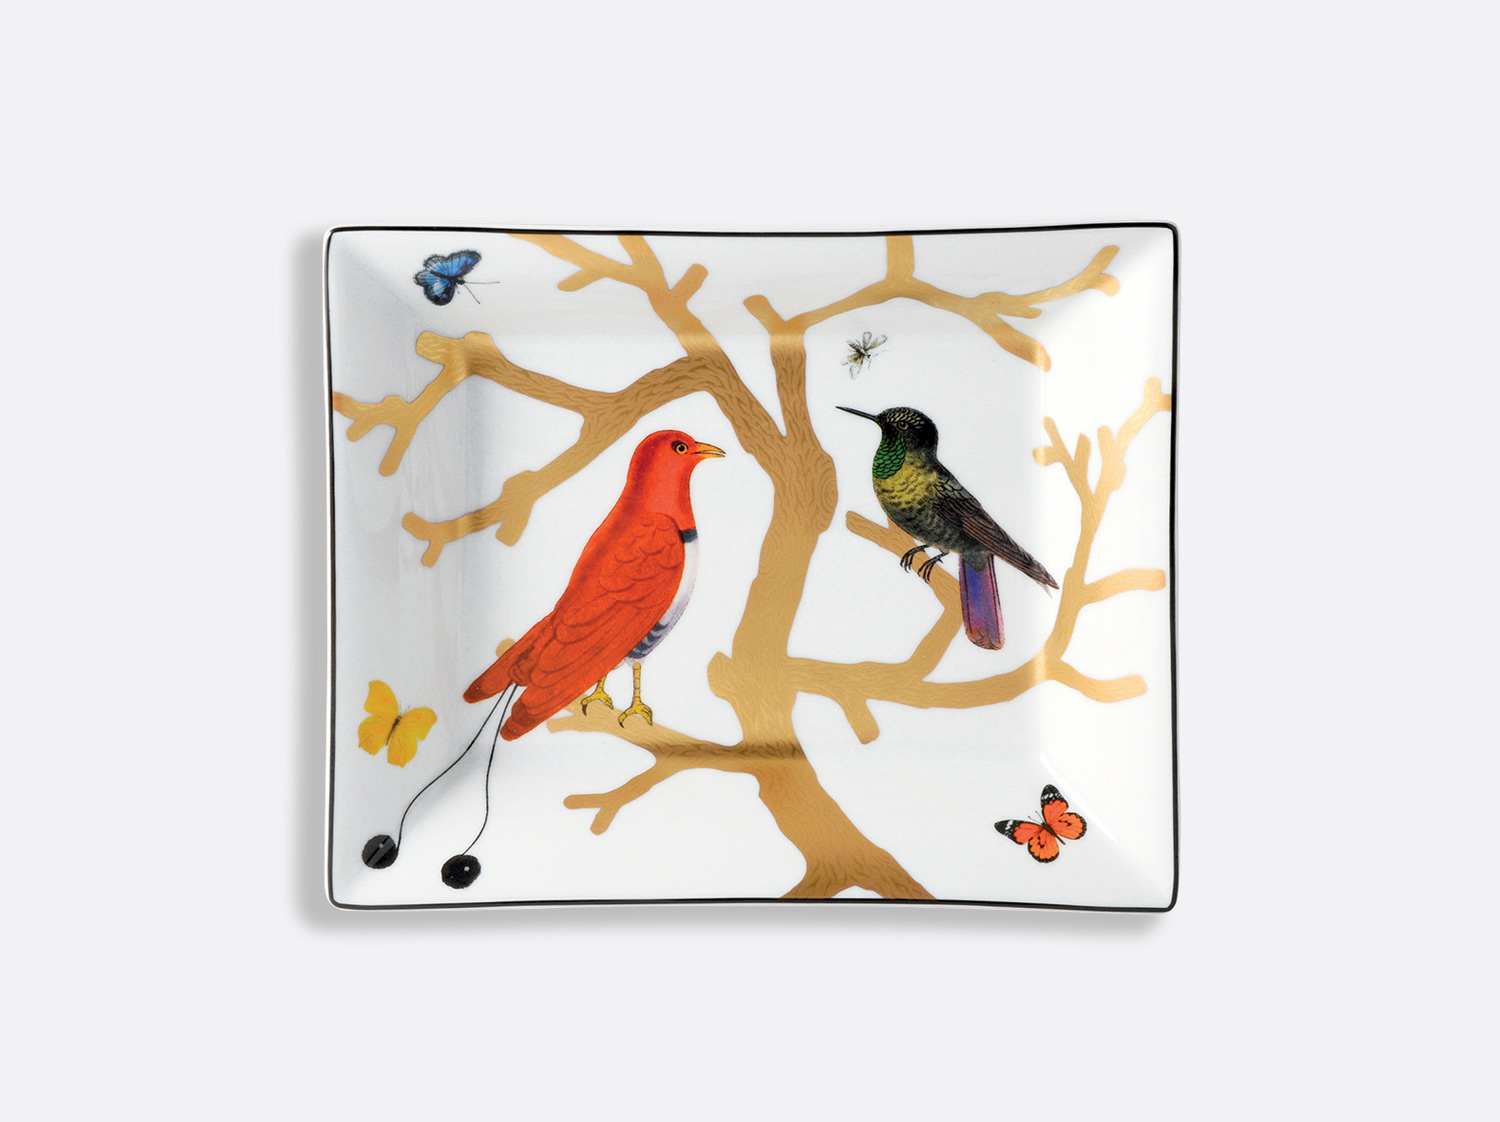 China Valet tray 7.9 x 6.3" of the collection Aux oiseaux | Bernardaud